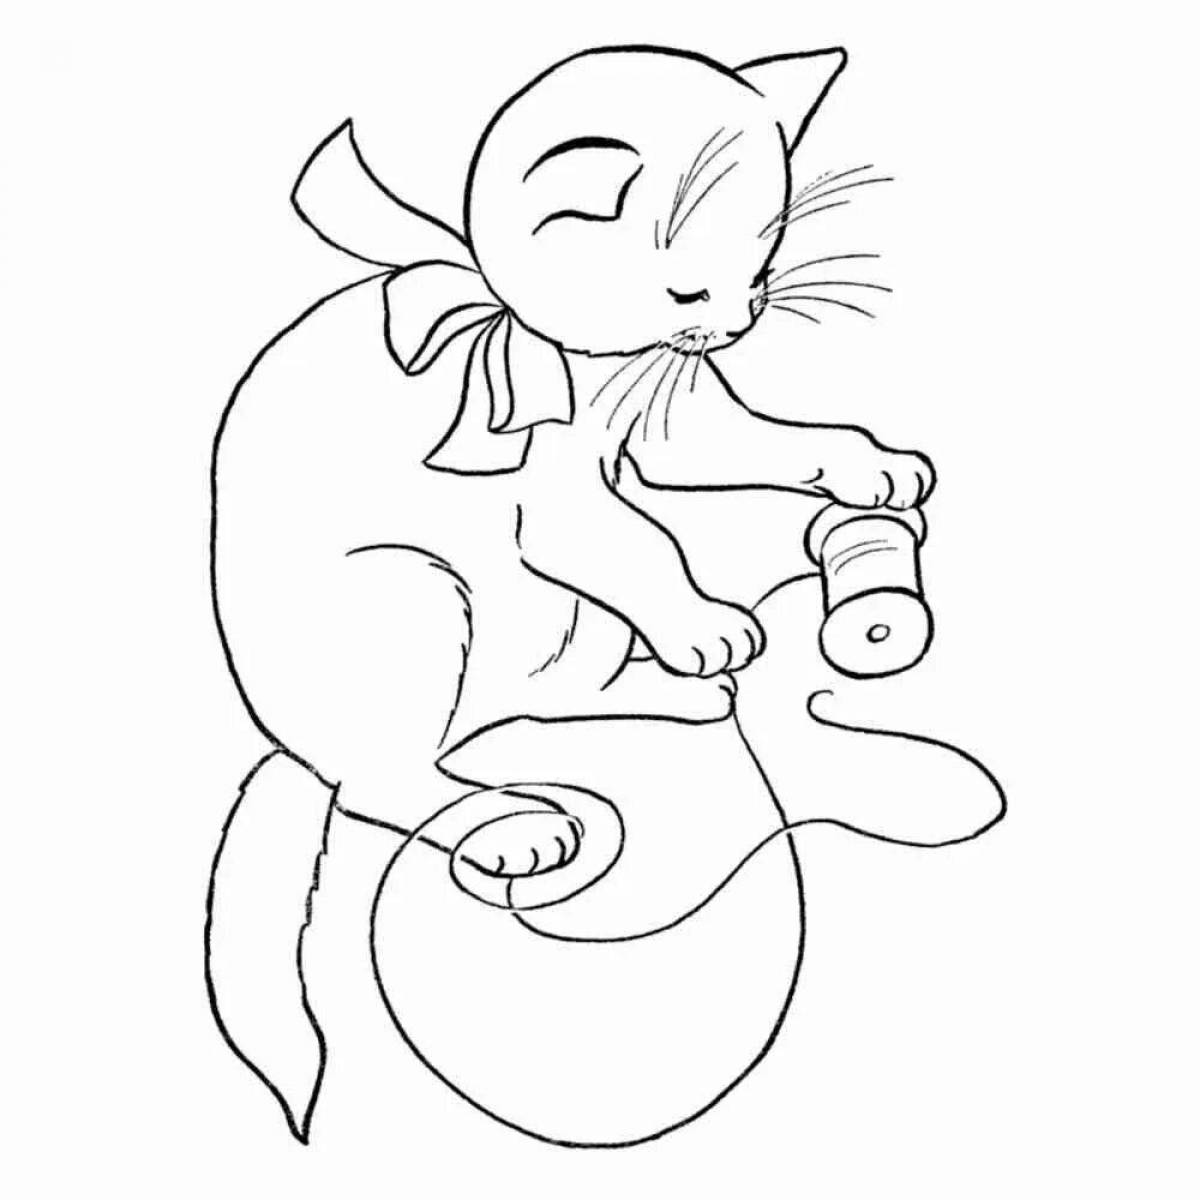 Creative kitty coloring games